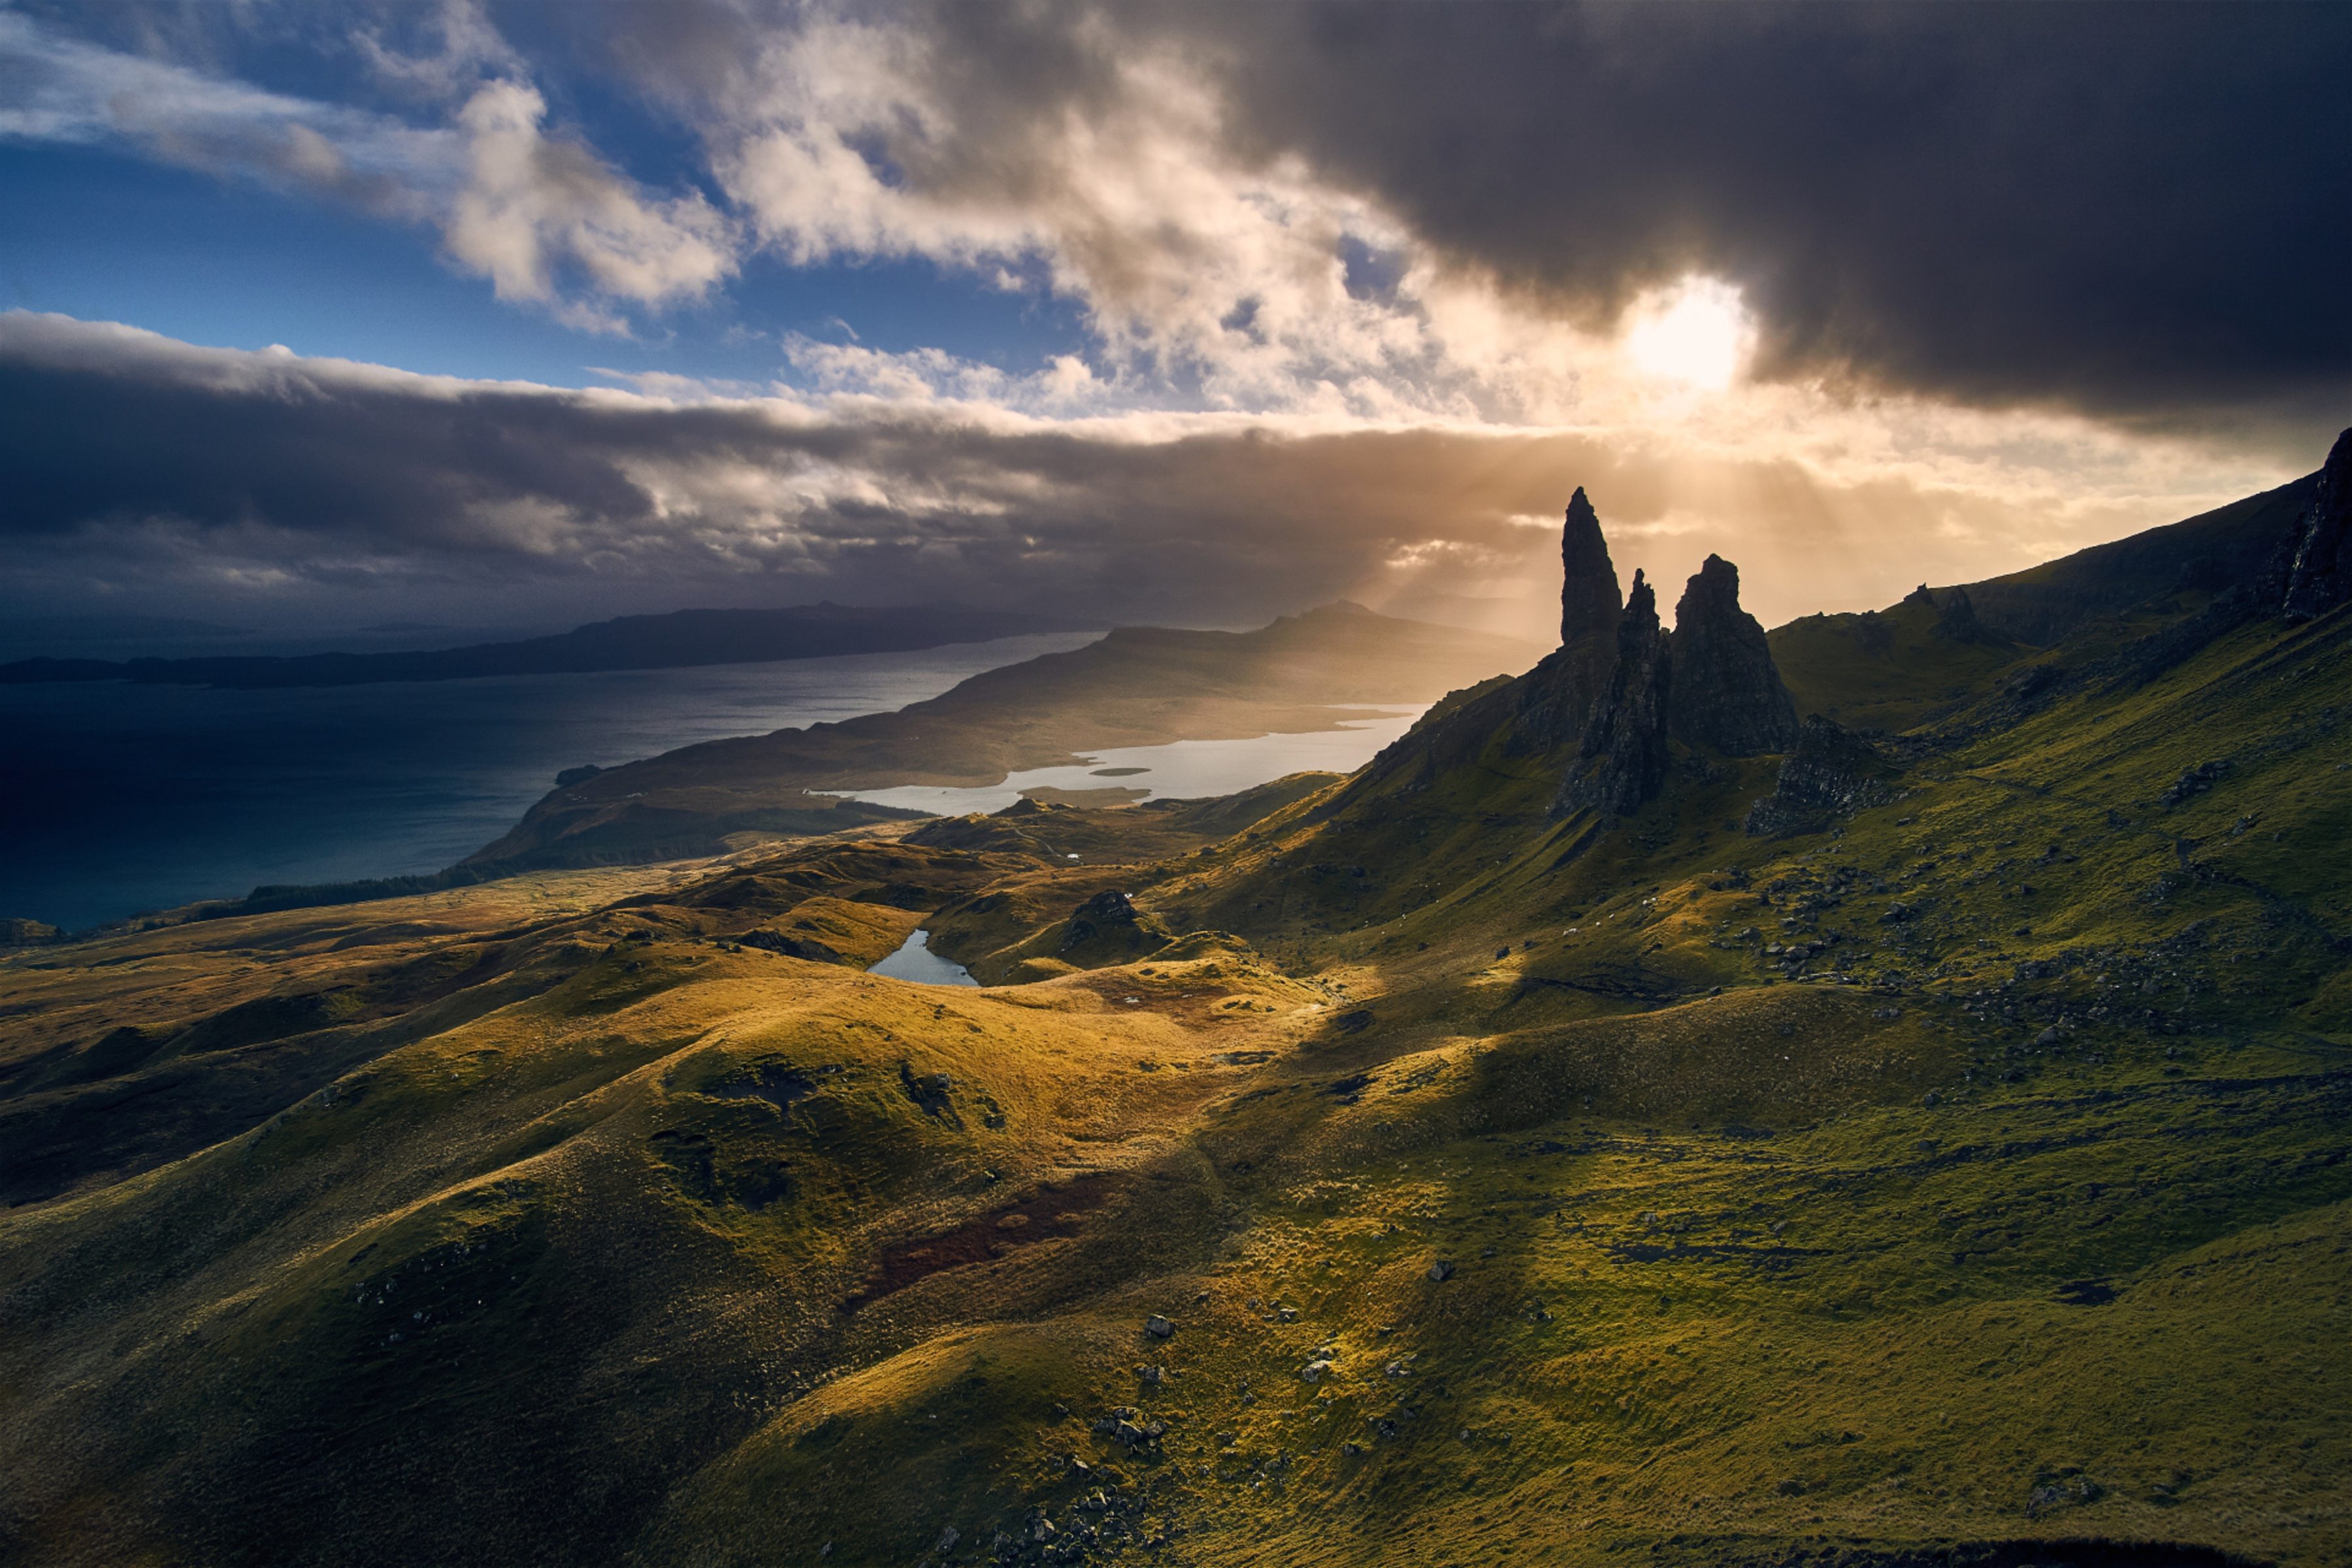 Highland Council is seeking public views over the plans to improve the path at the Old Man of Storr